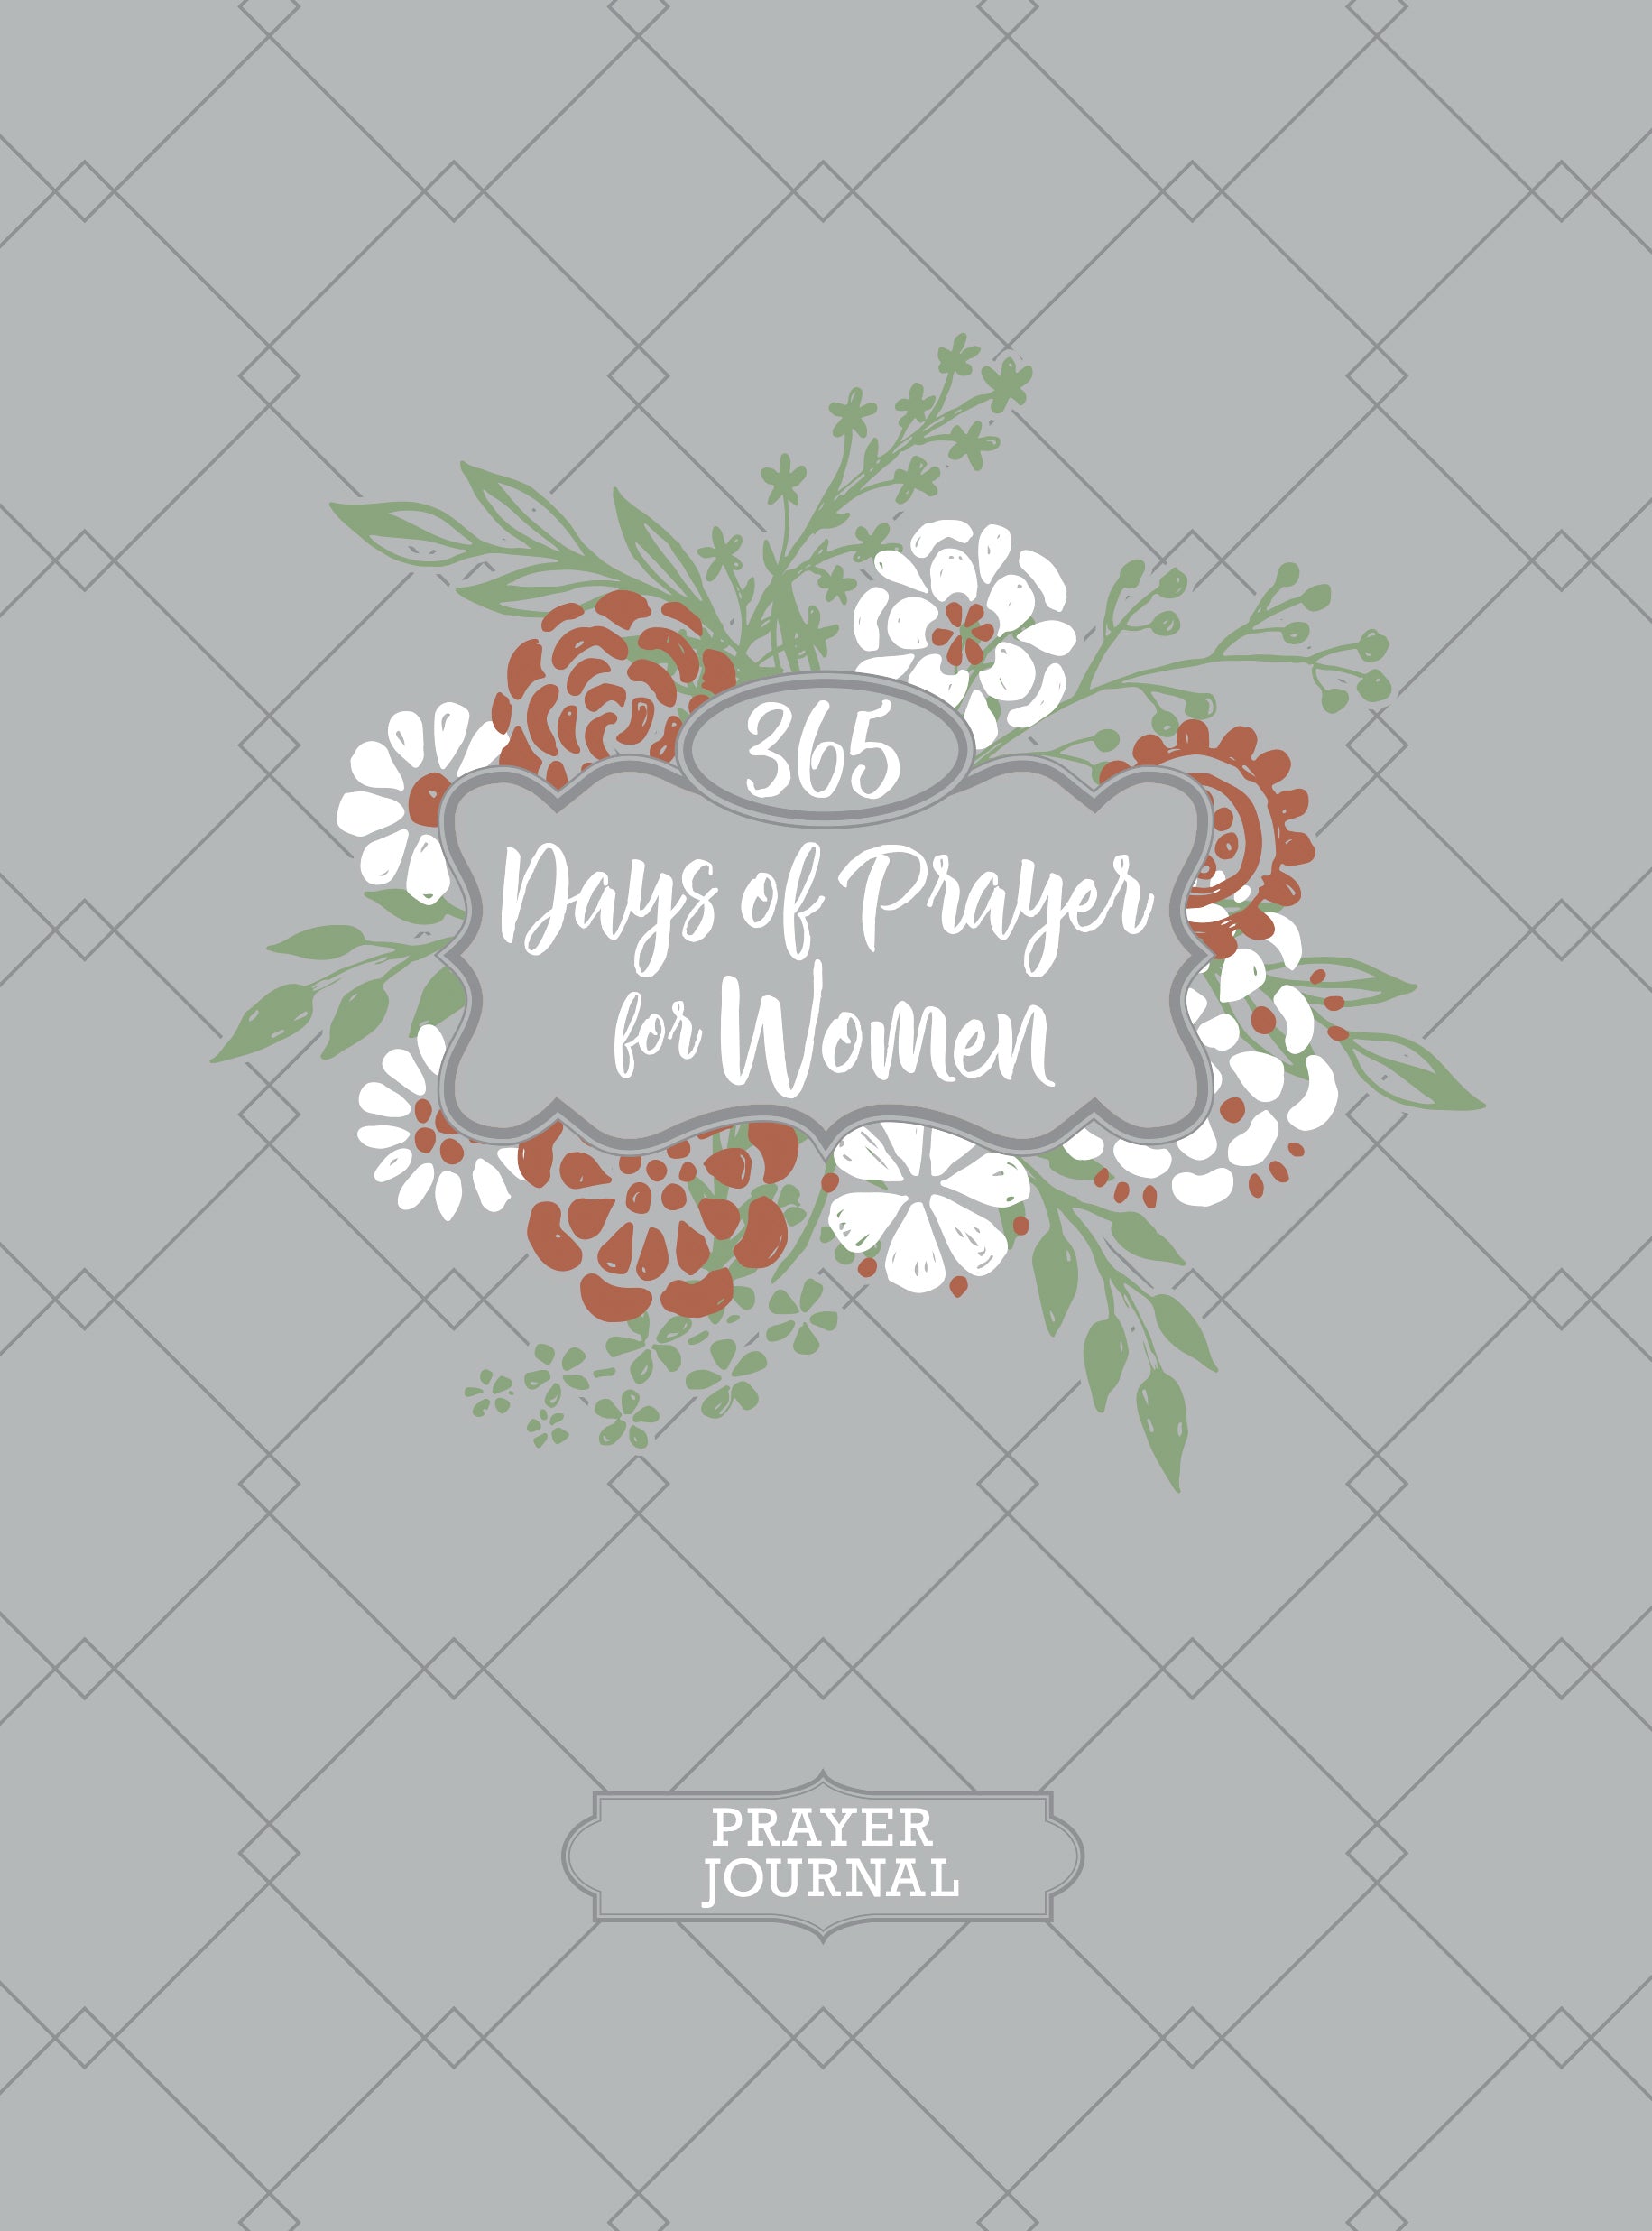 Image of 365 Days of Prayer for Women other